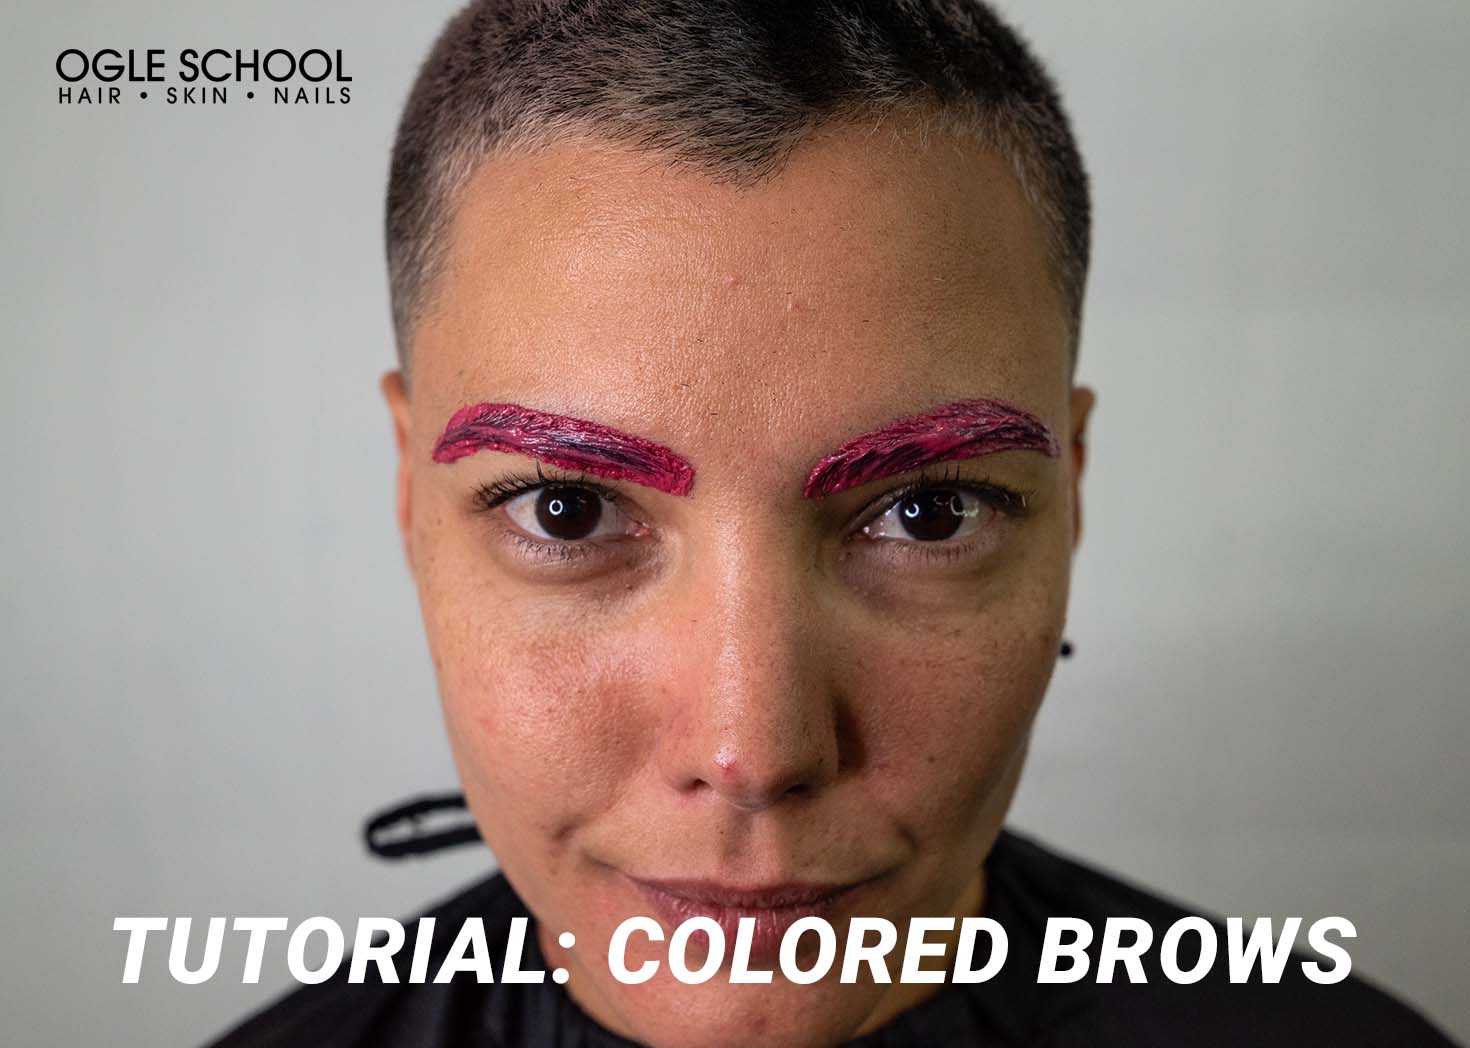 Leave dye on brows